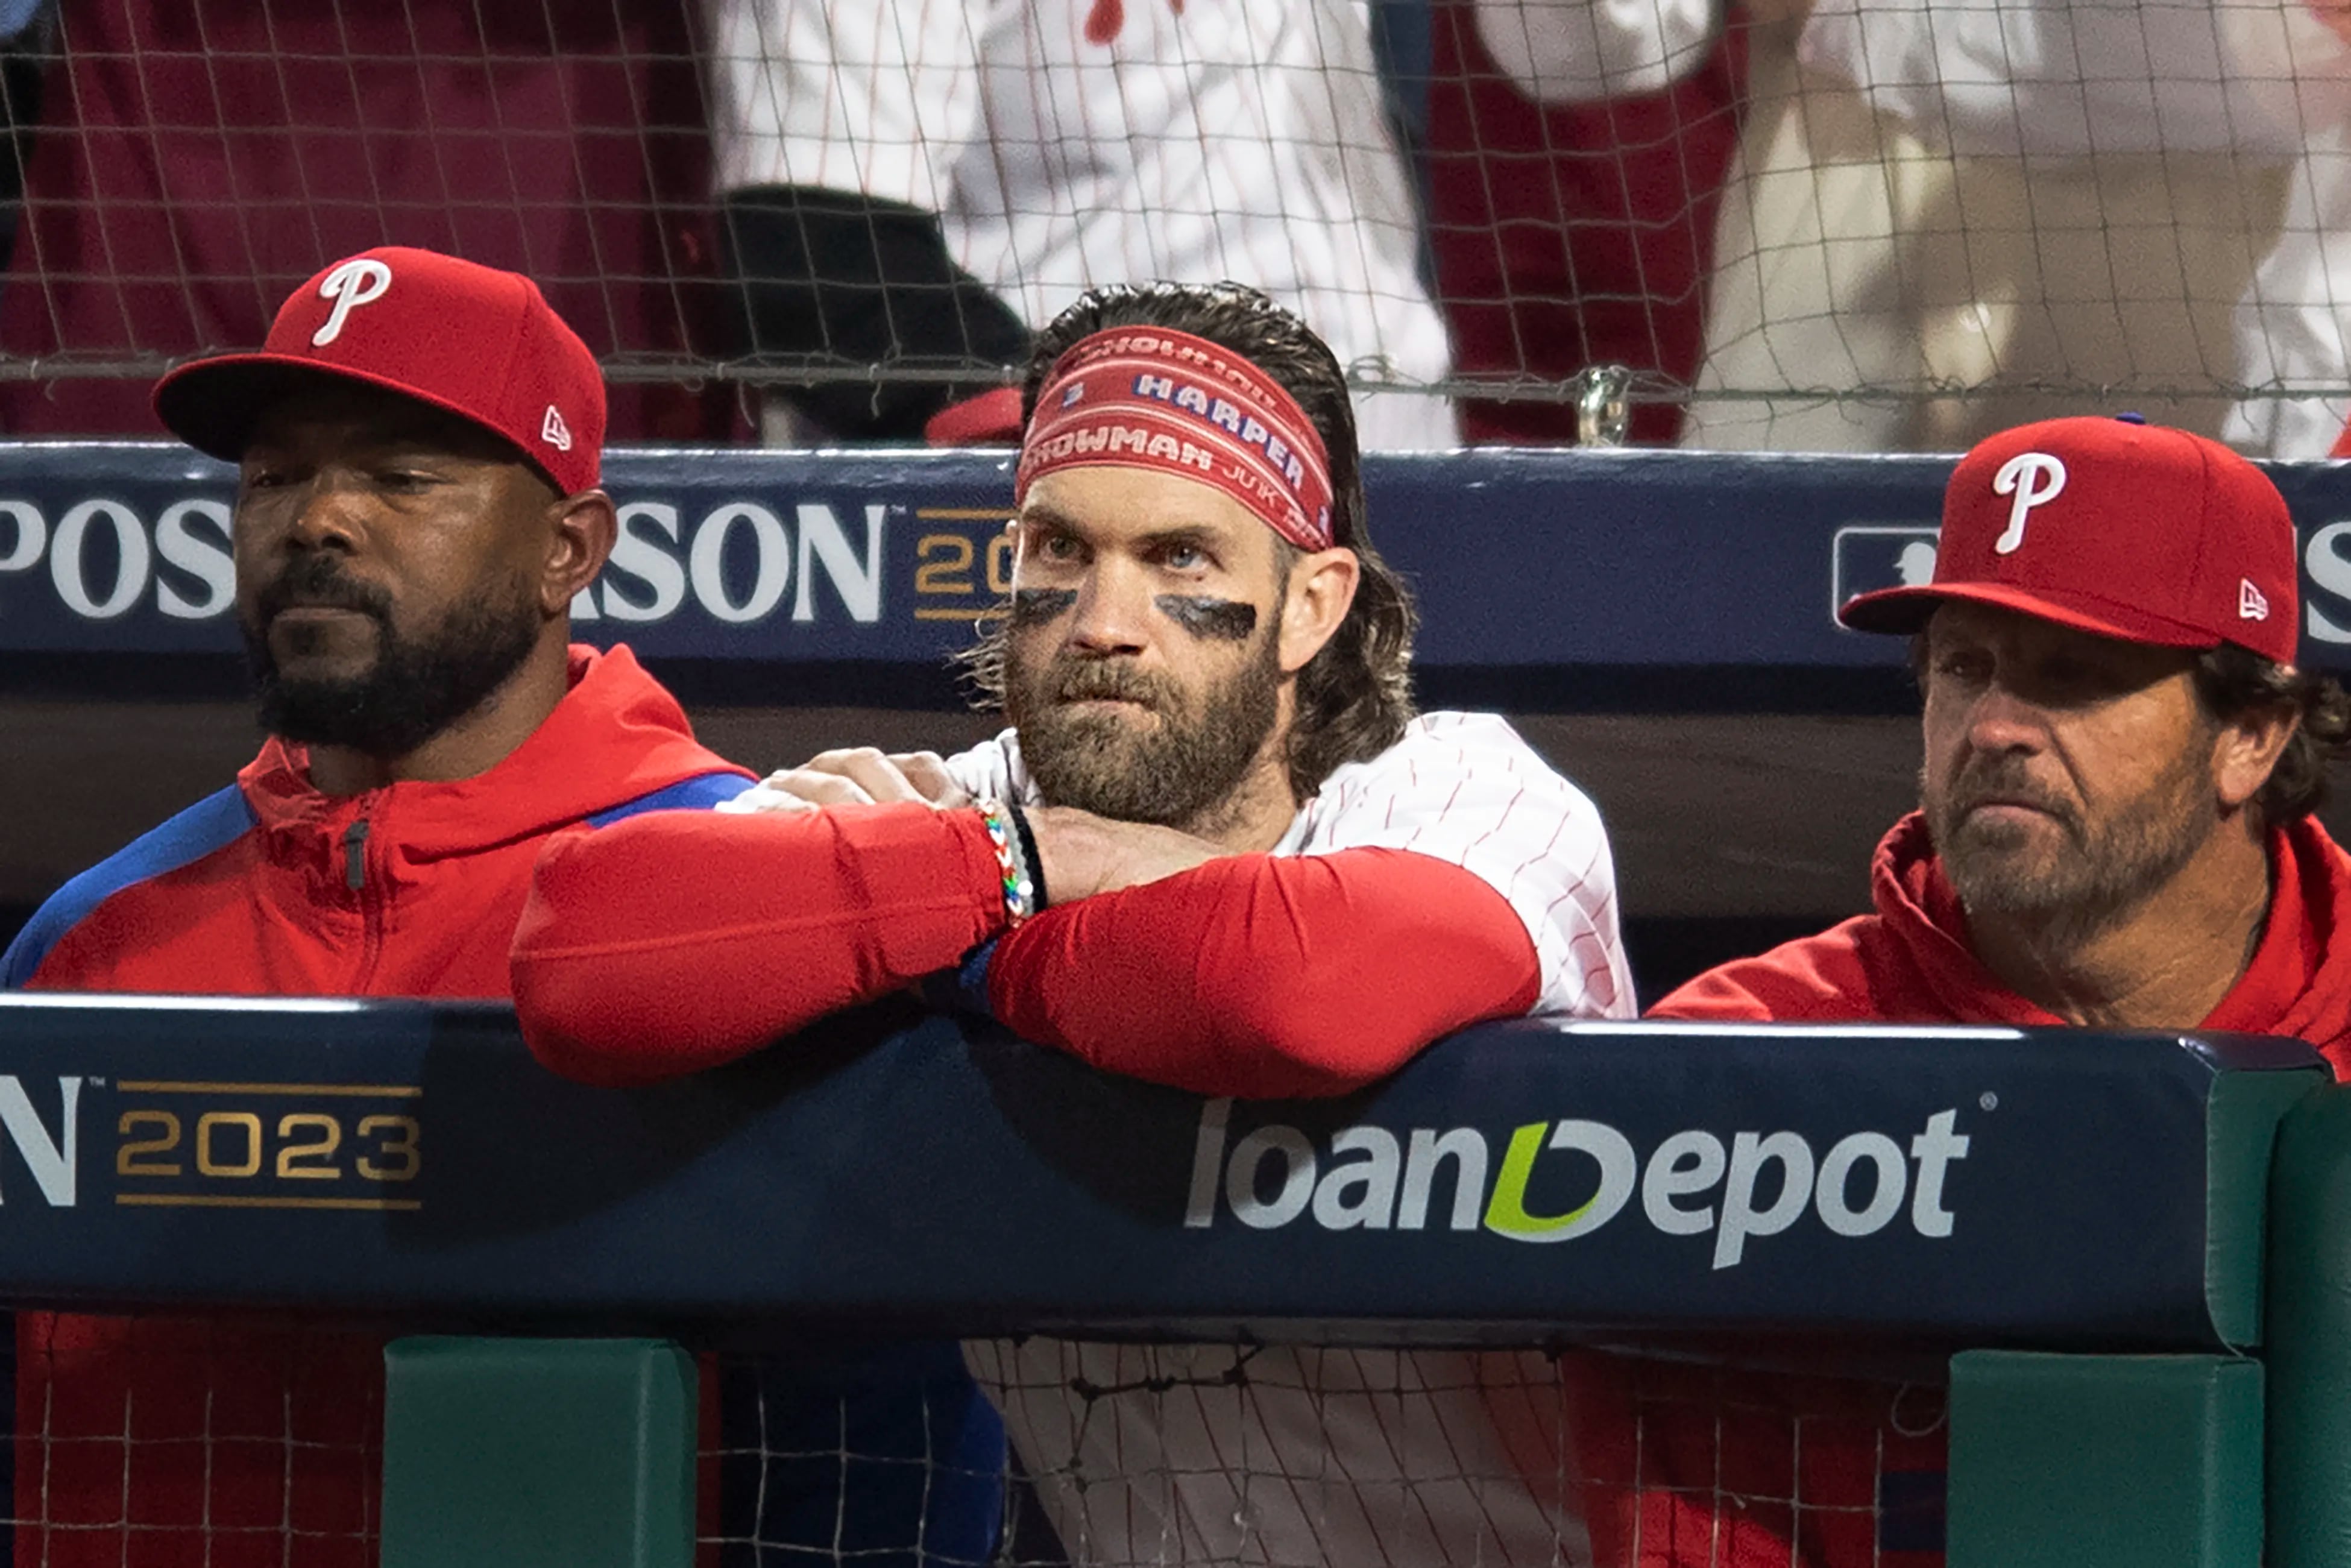 MLB playoffs: Phillies oust defending champ Braves for berth in NLCS